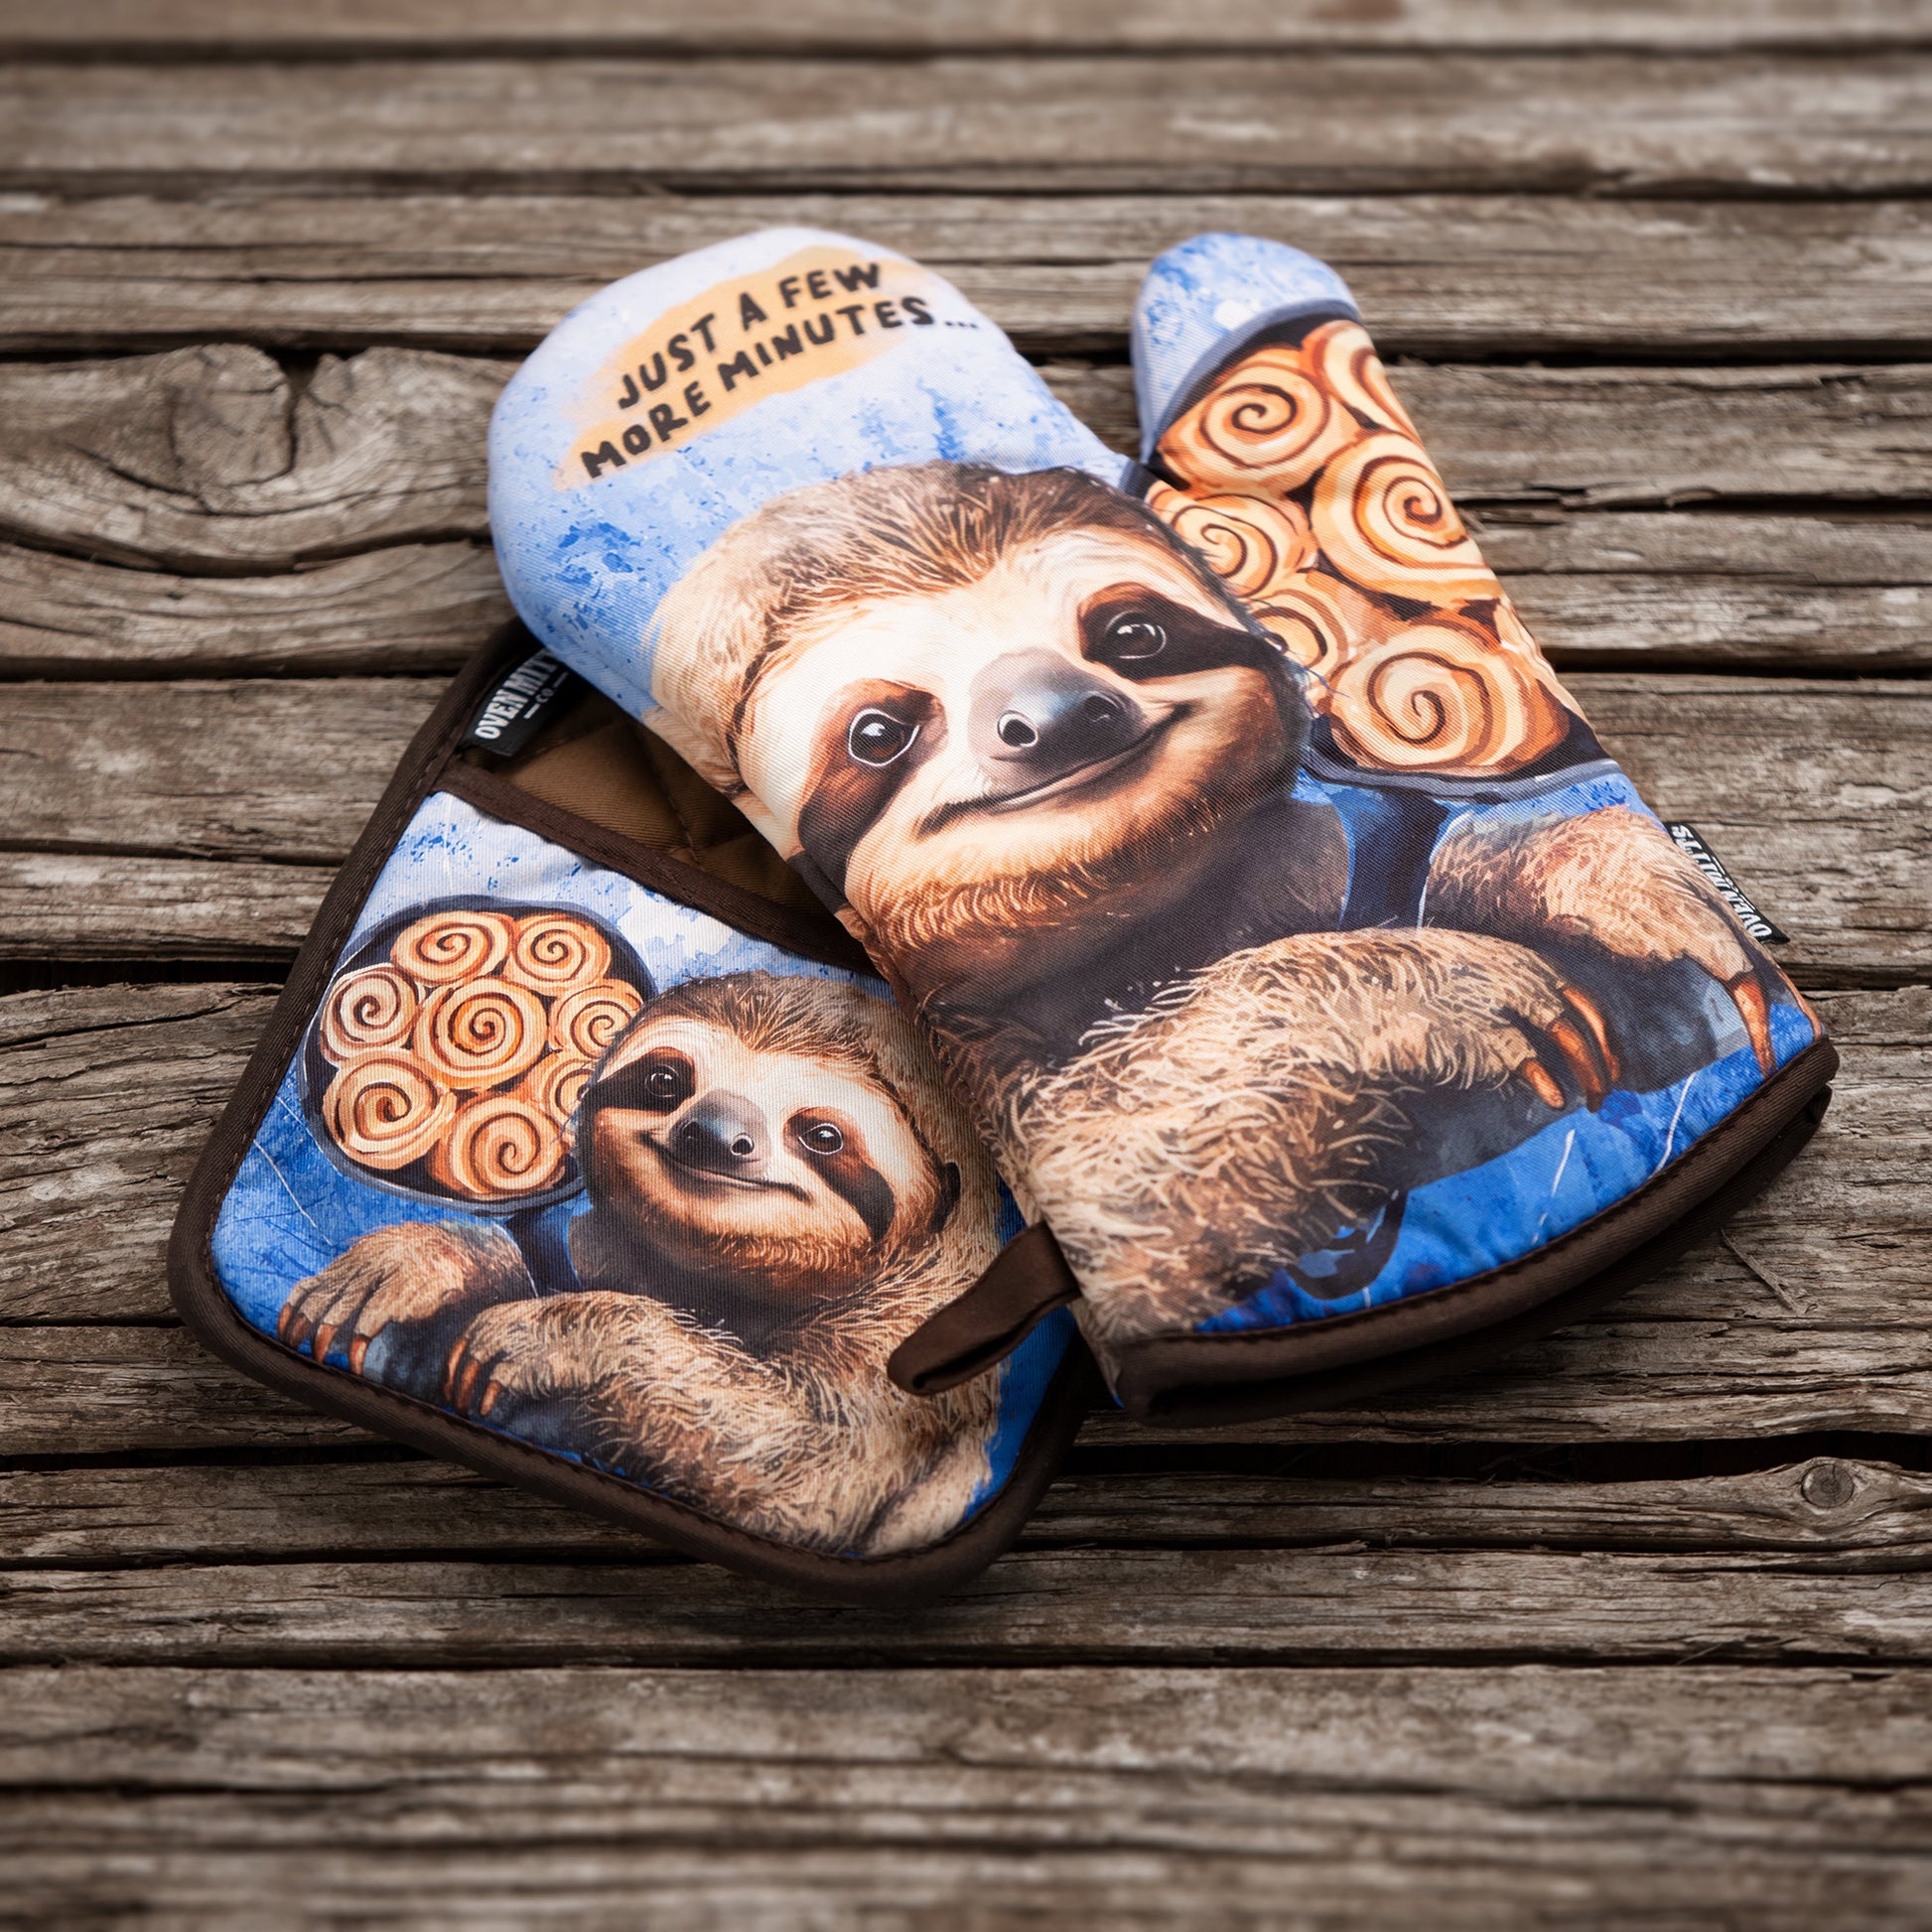 Sloth Just A Few More Minutes Oven Mitts And Potholder hilarious funny